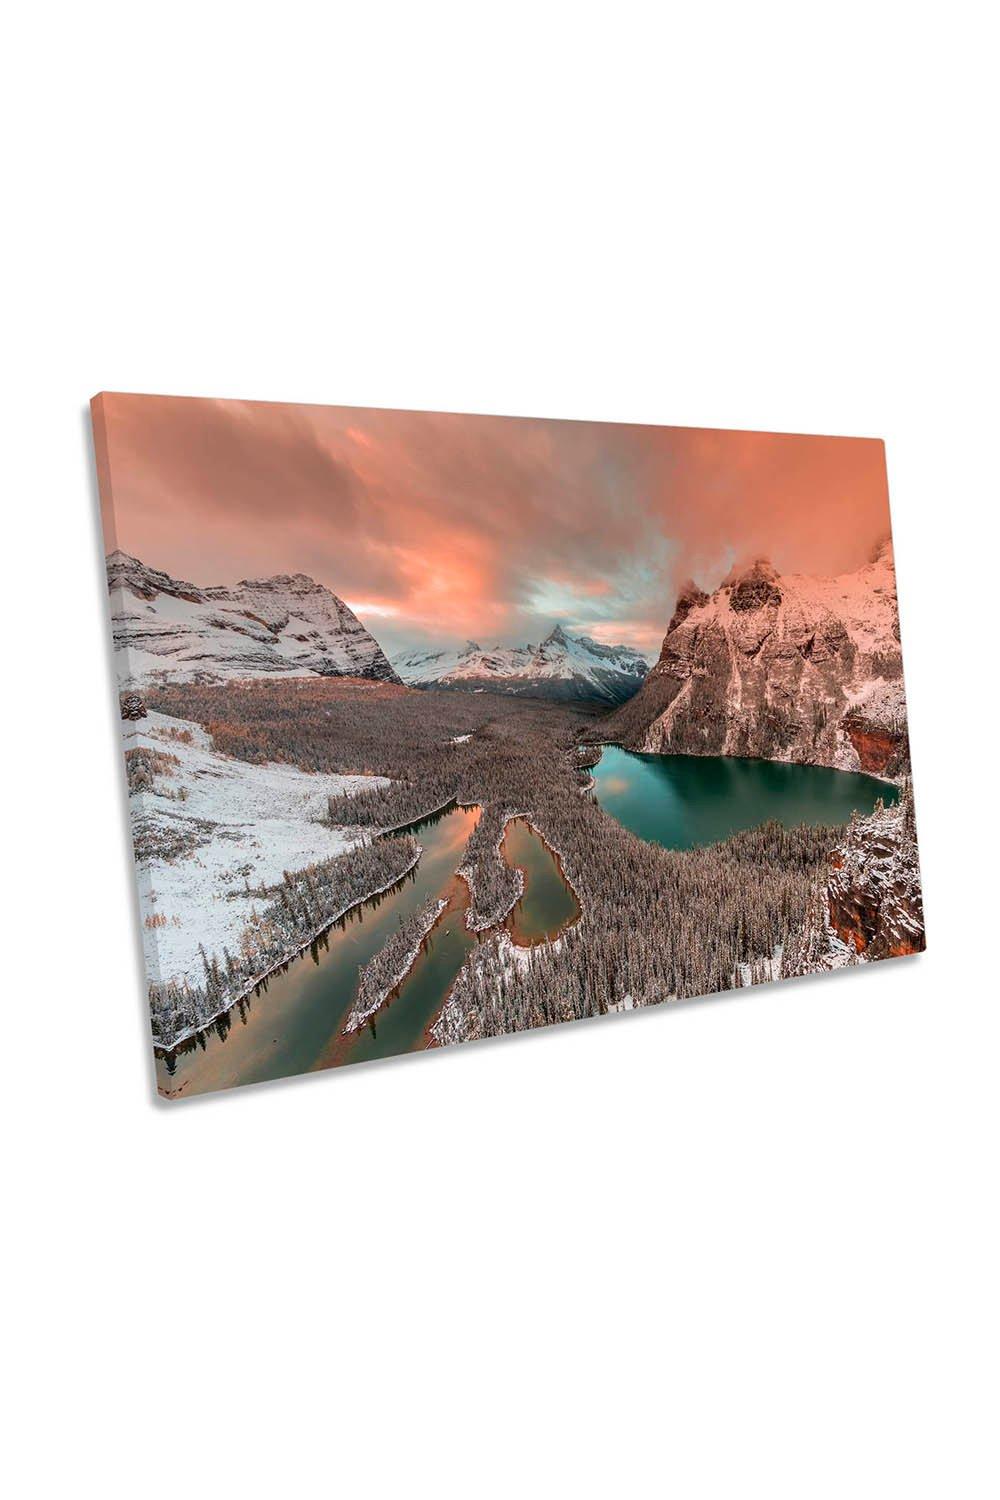 Sunset over Opabin Lake Canada Canvas Wall Art Picture Print